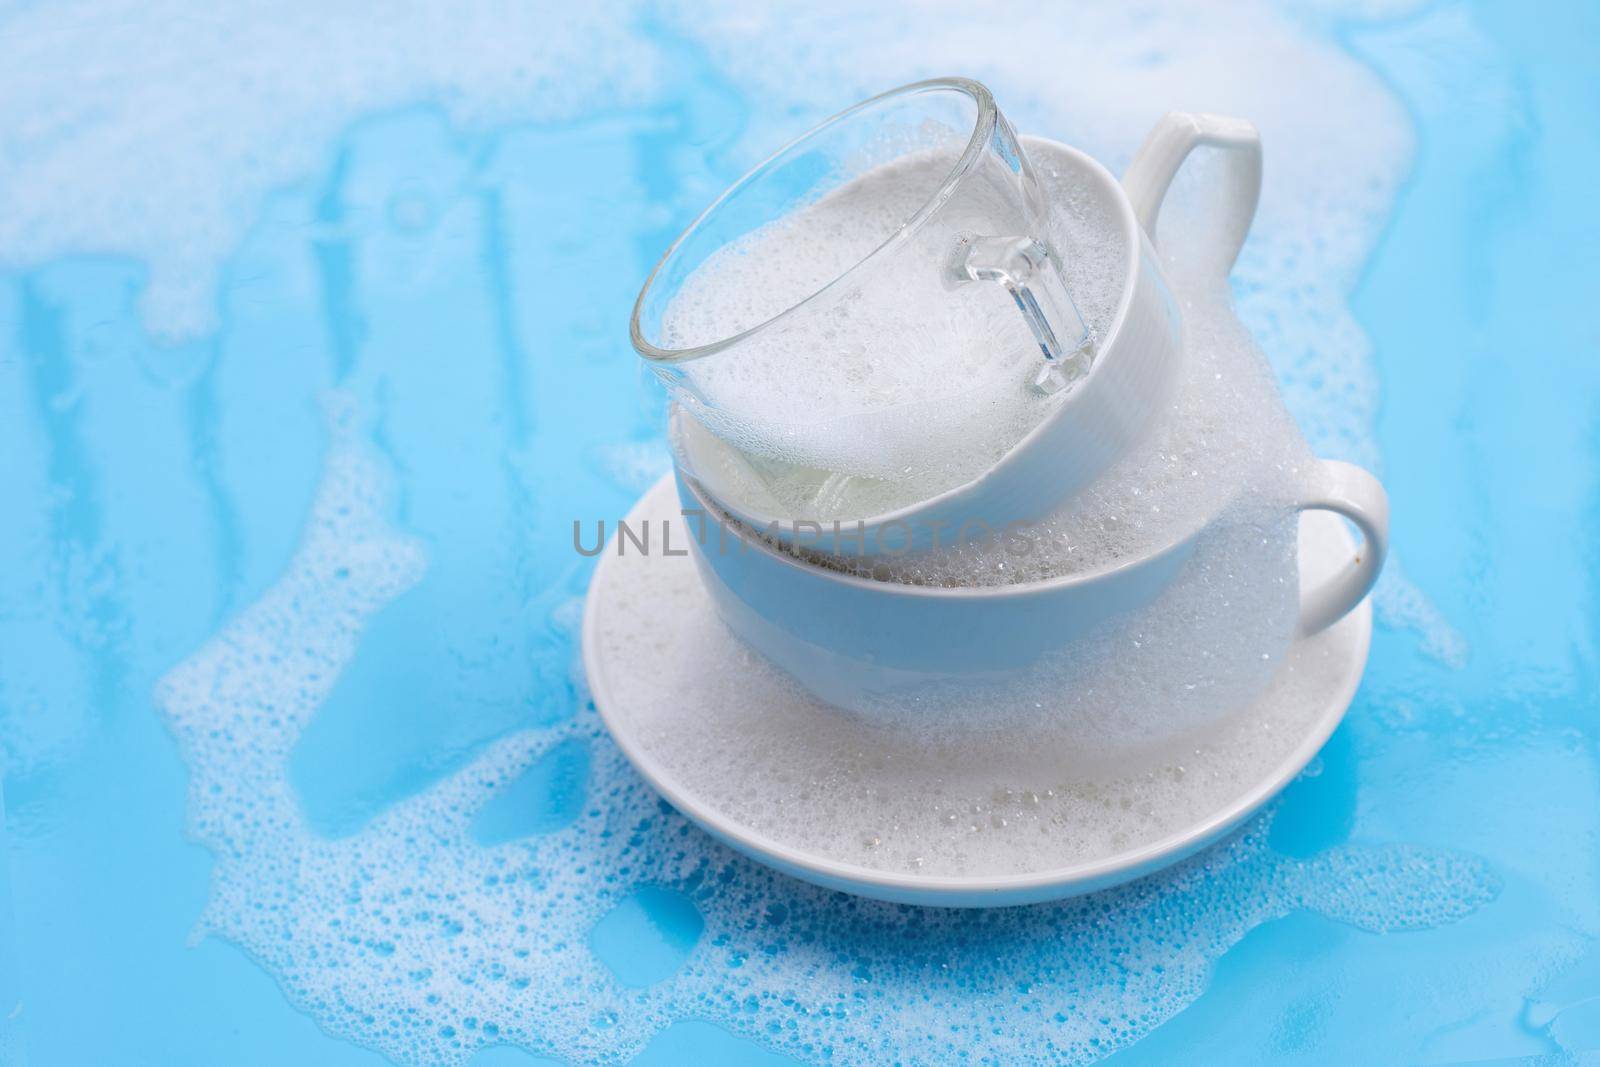 Washing an used drinking cups on wet blue with soapy foam background.